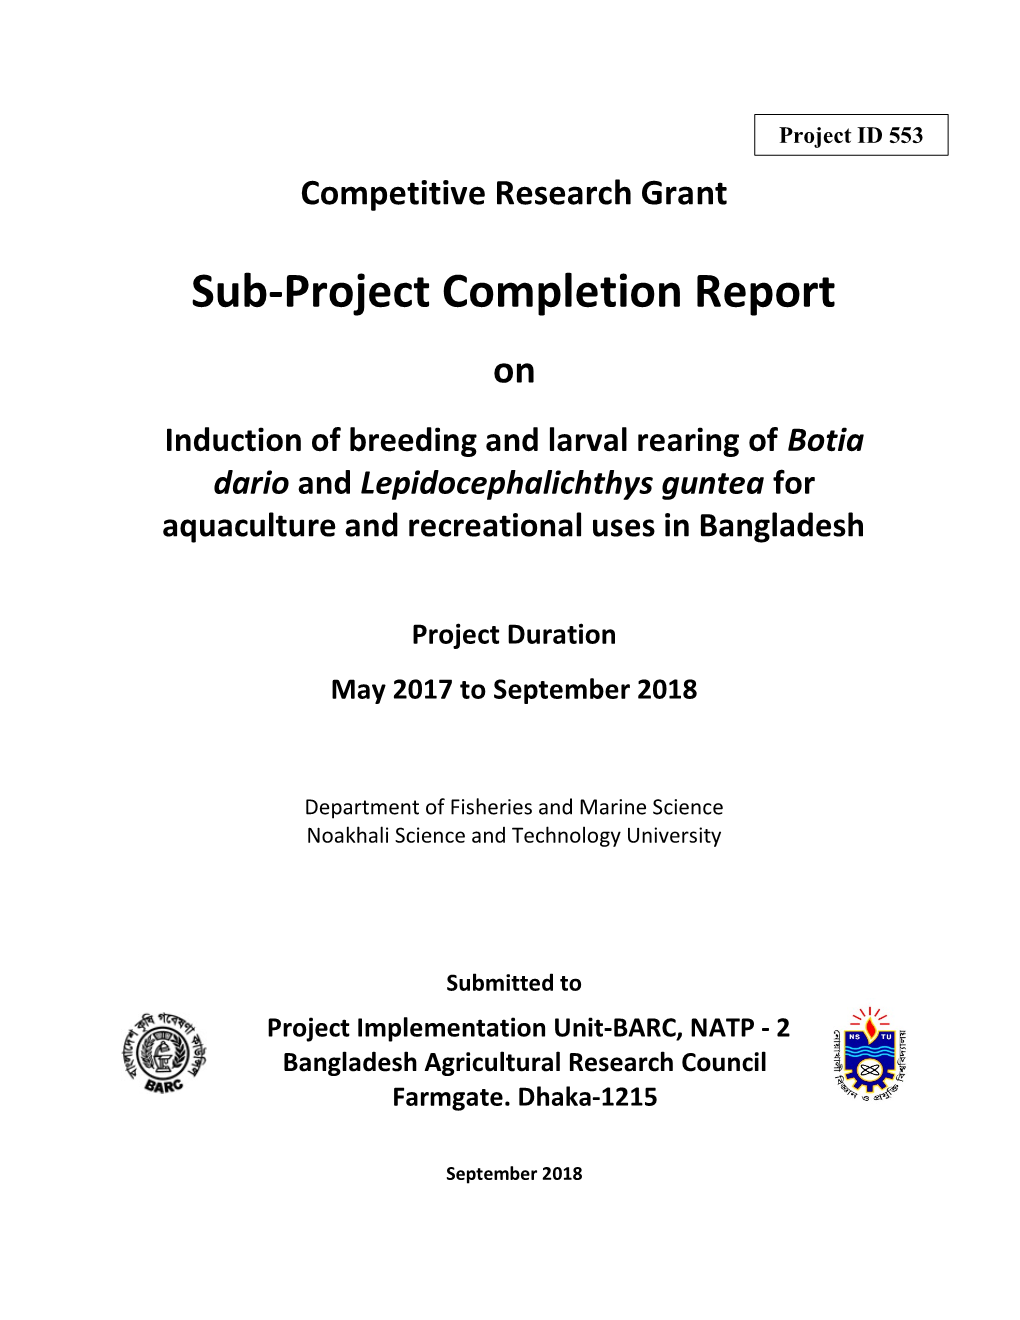 Sub-Project Completion Report